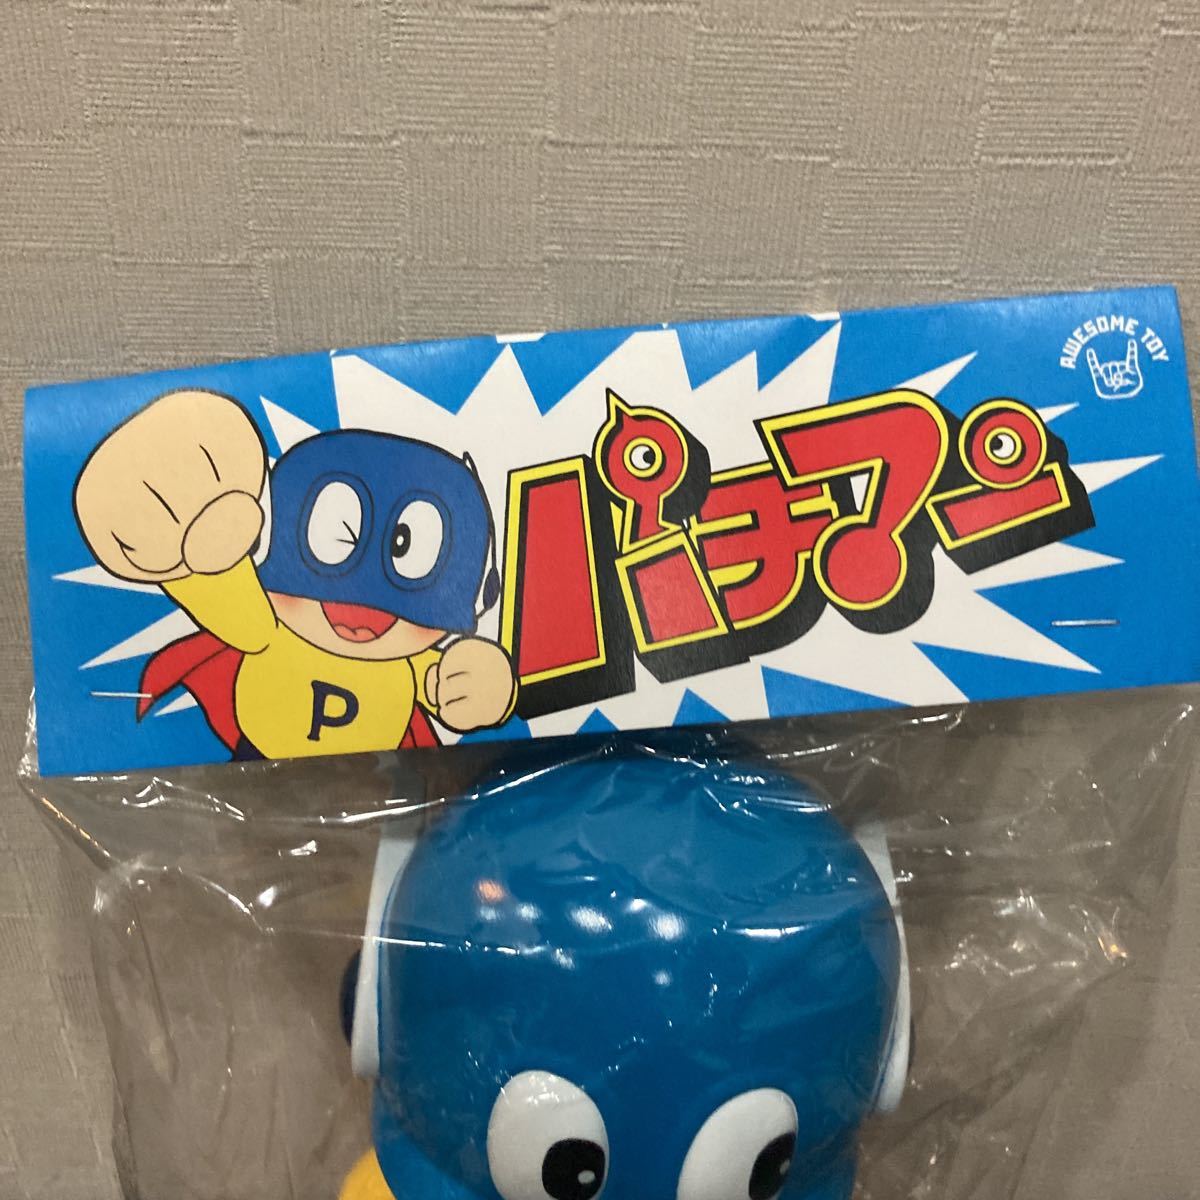 Awesome toy パチマン パーマン ソフビ 検)レトロ パチ パチソフビ 無